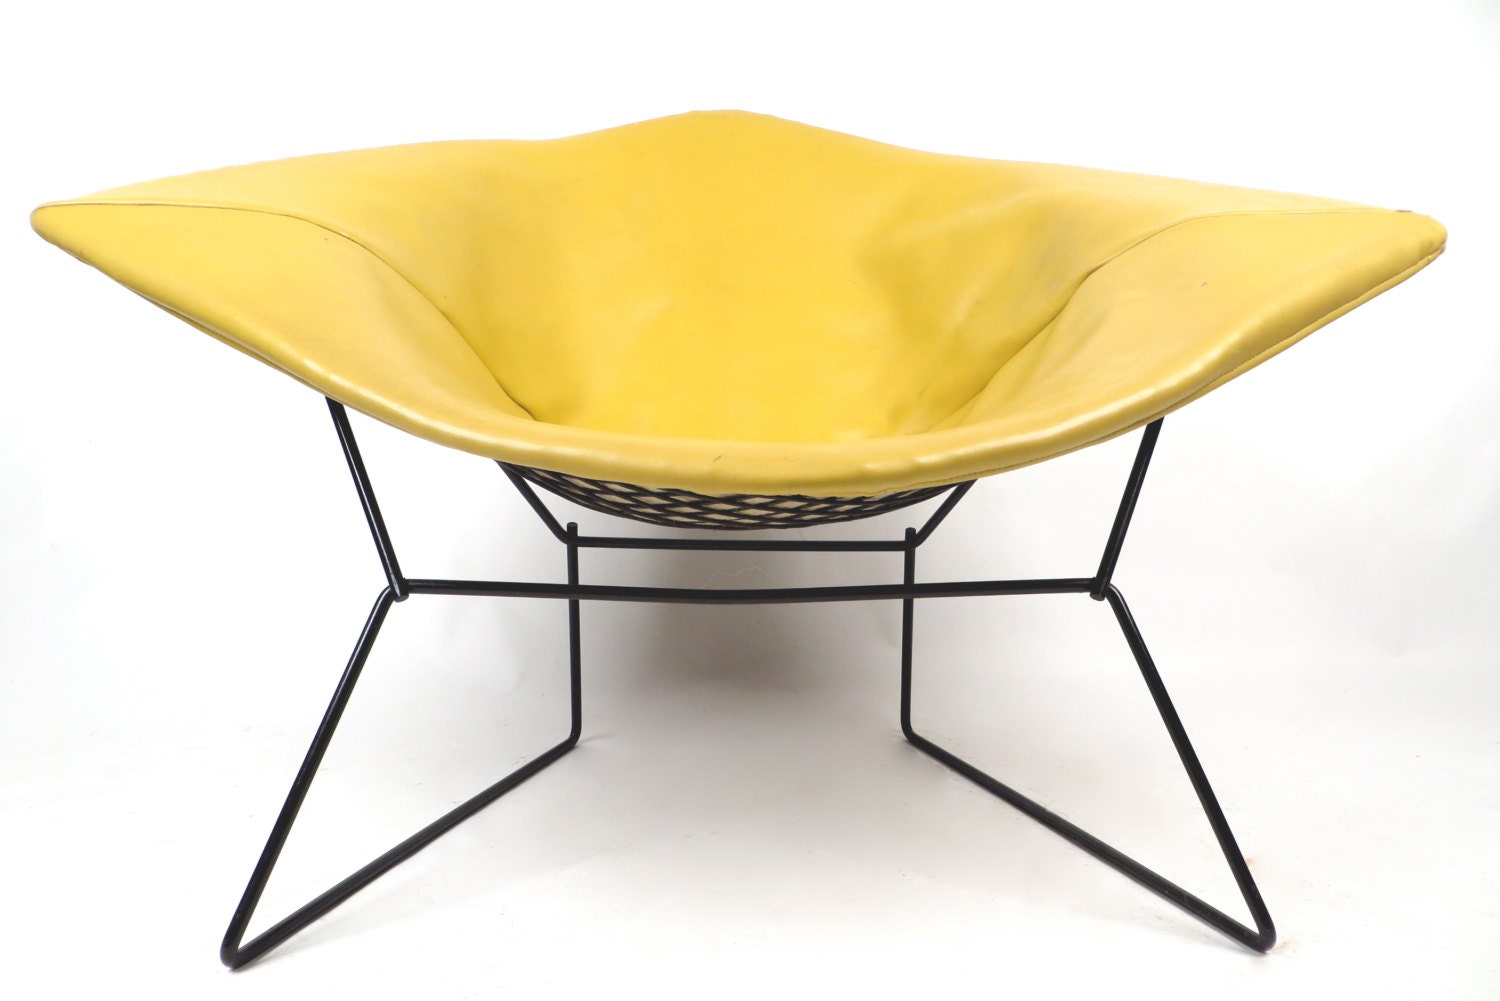 Knoll Bertoia large diamond chair with yellow cover. Free shipping in USA on sale - hermanmillermodern